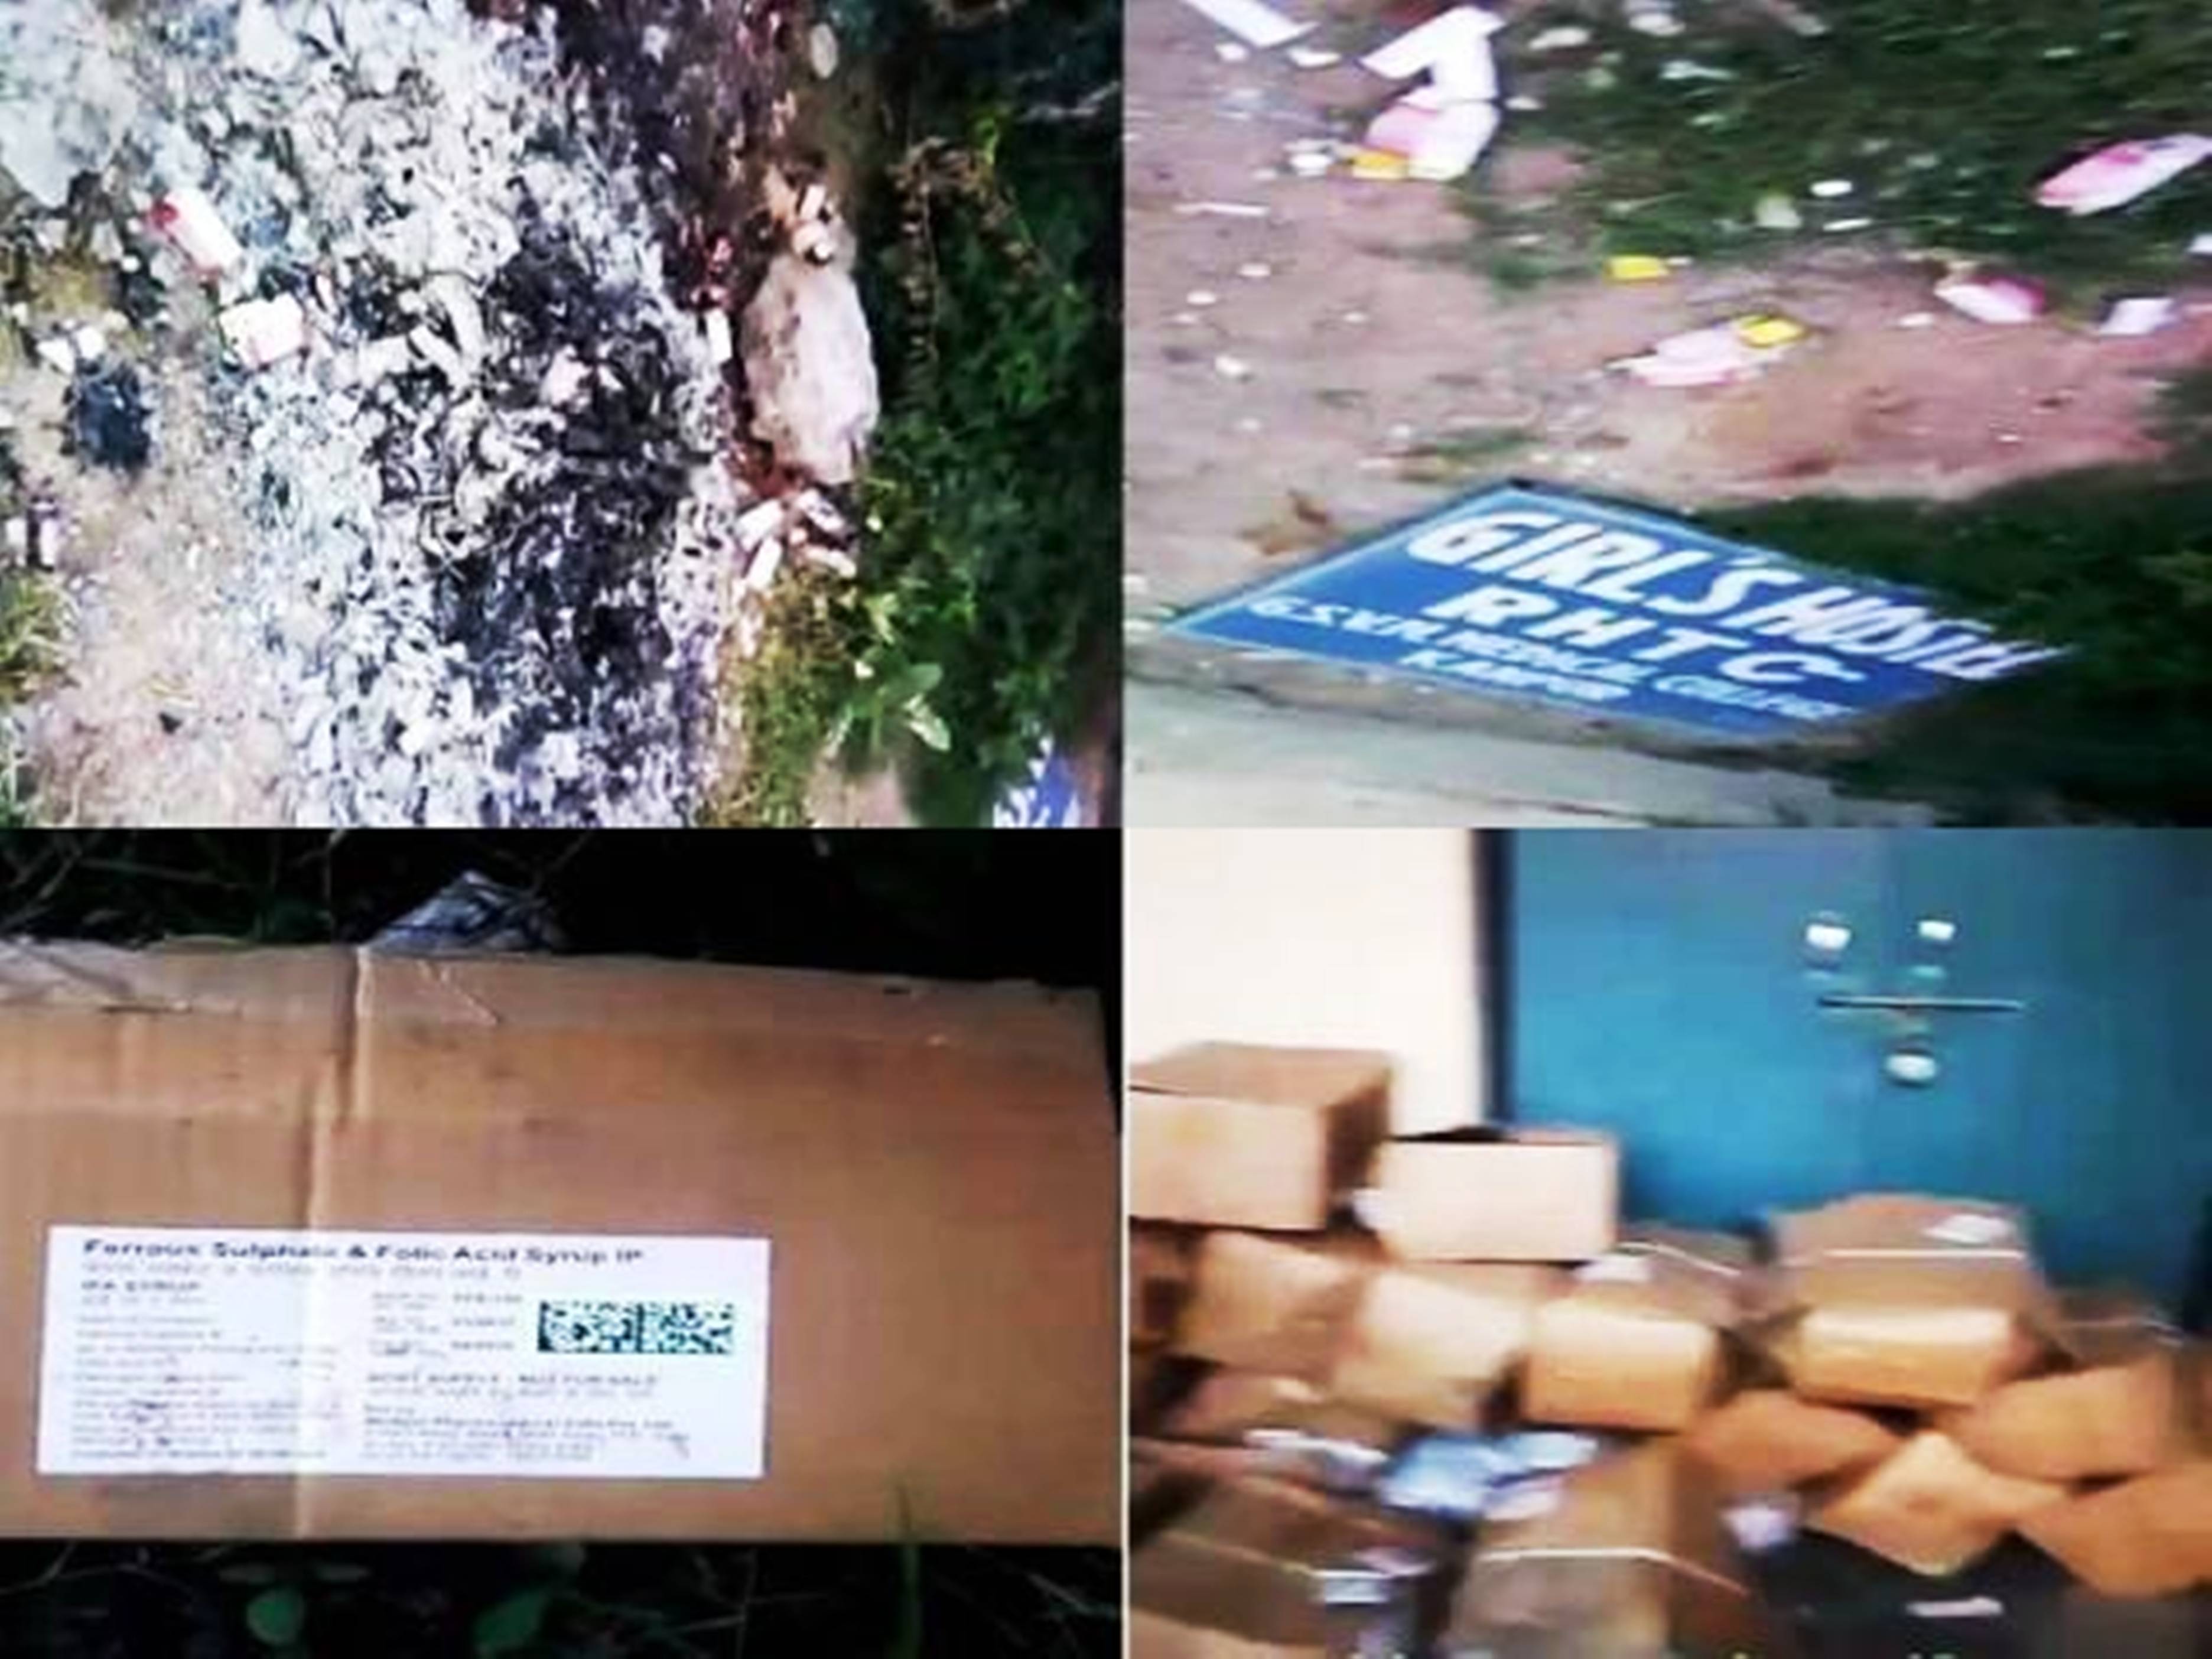 Expired medicine burned due to doctors irregularity in Kanpur